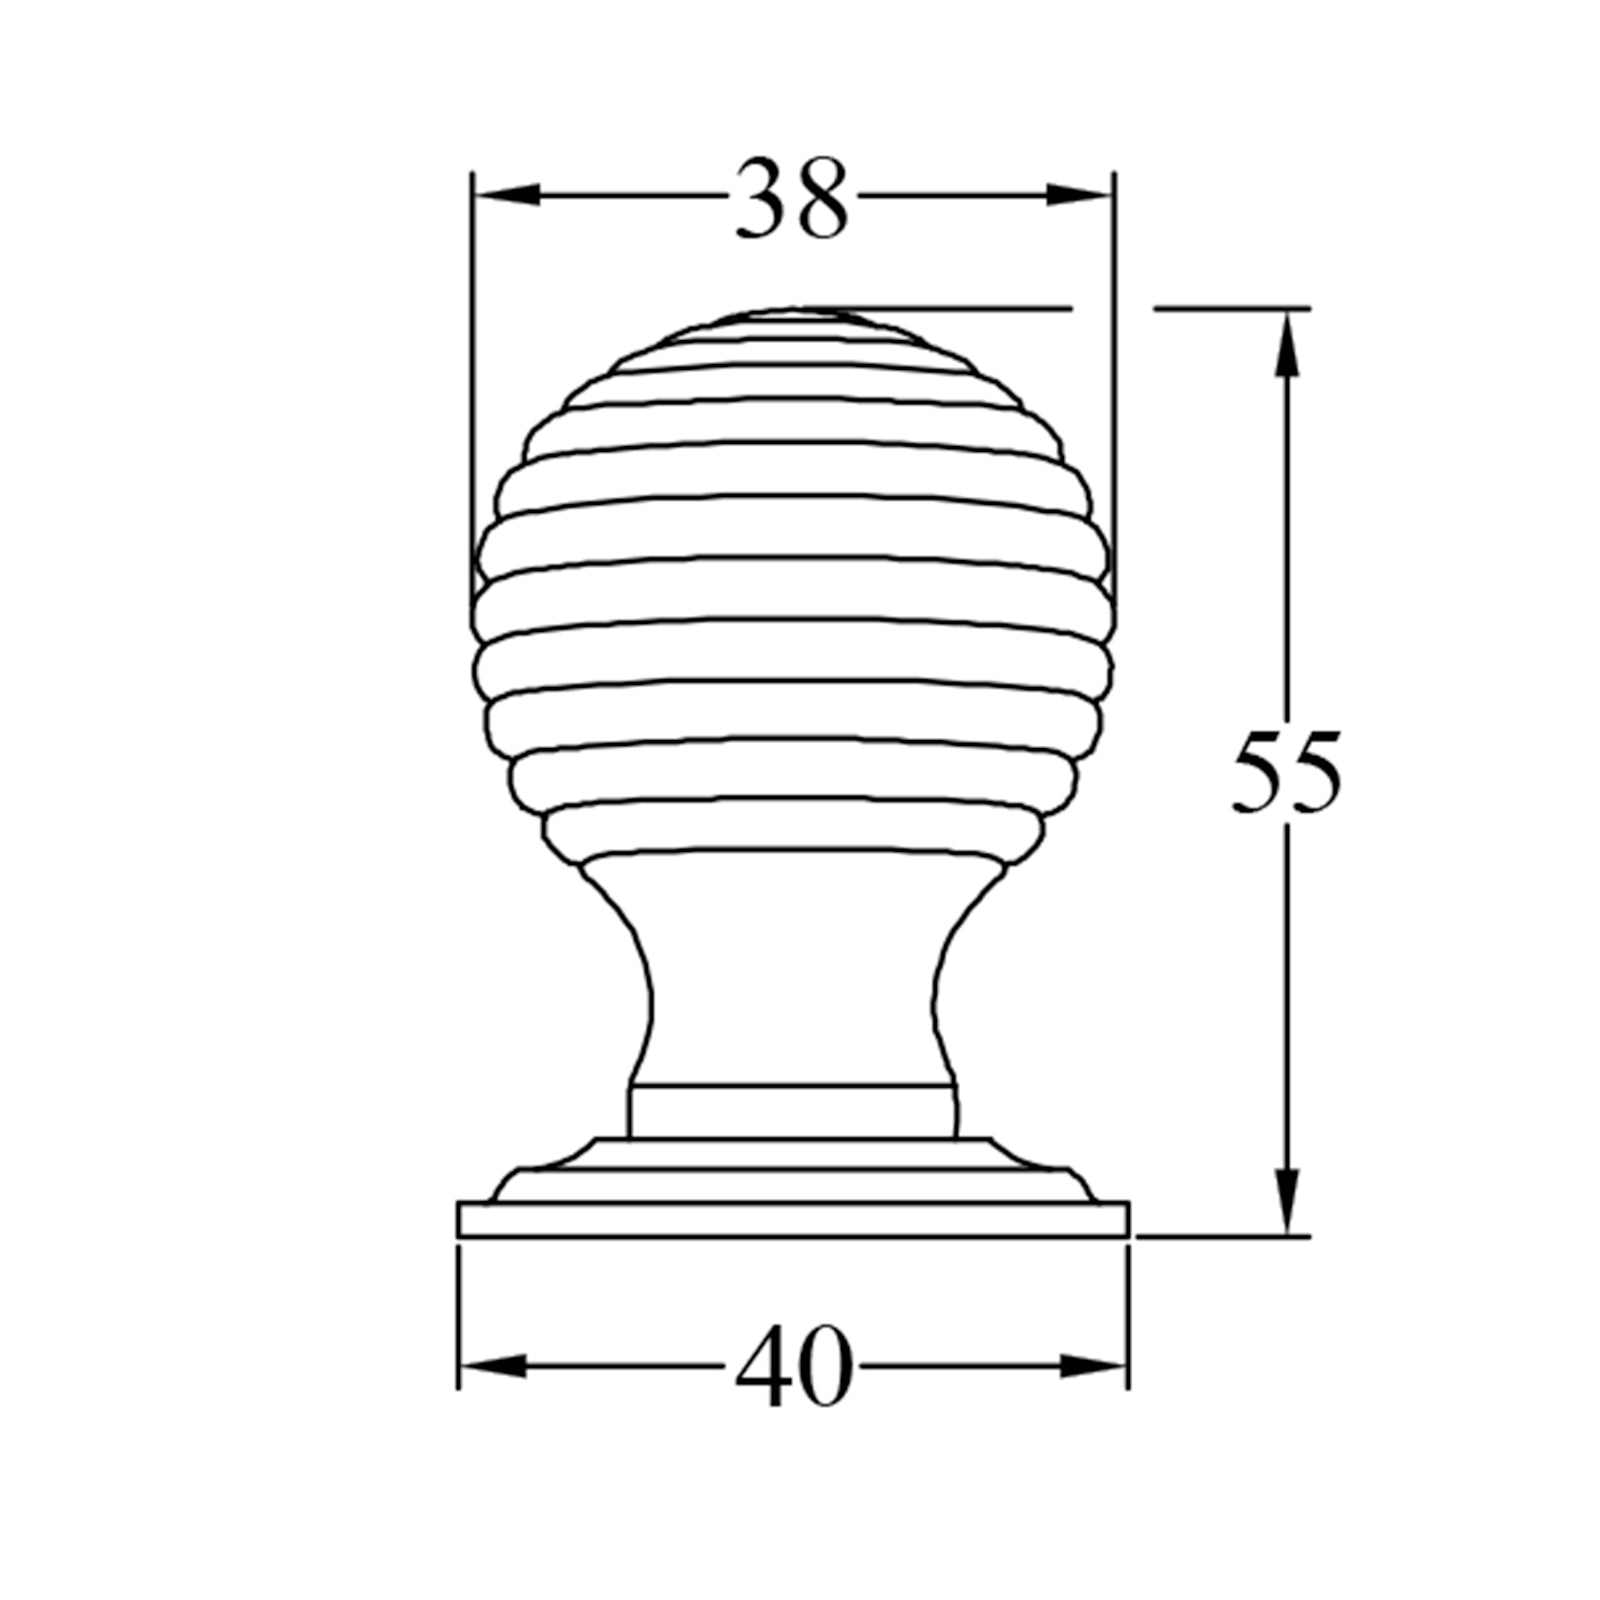 Basic Dimension Drawing of Large Beehive Cabinet Knob SHOW